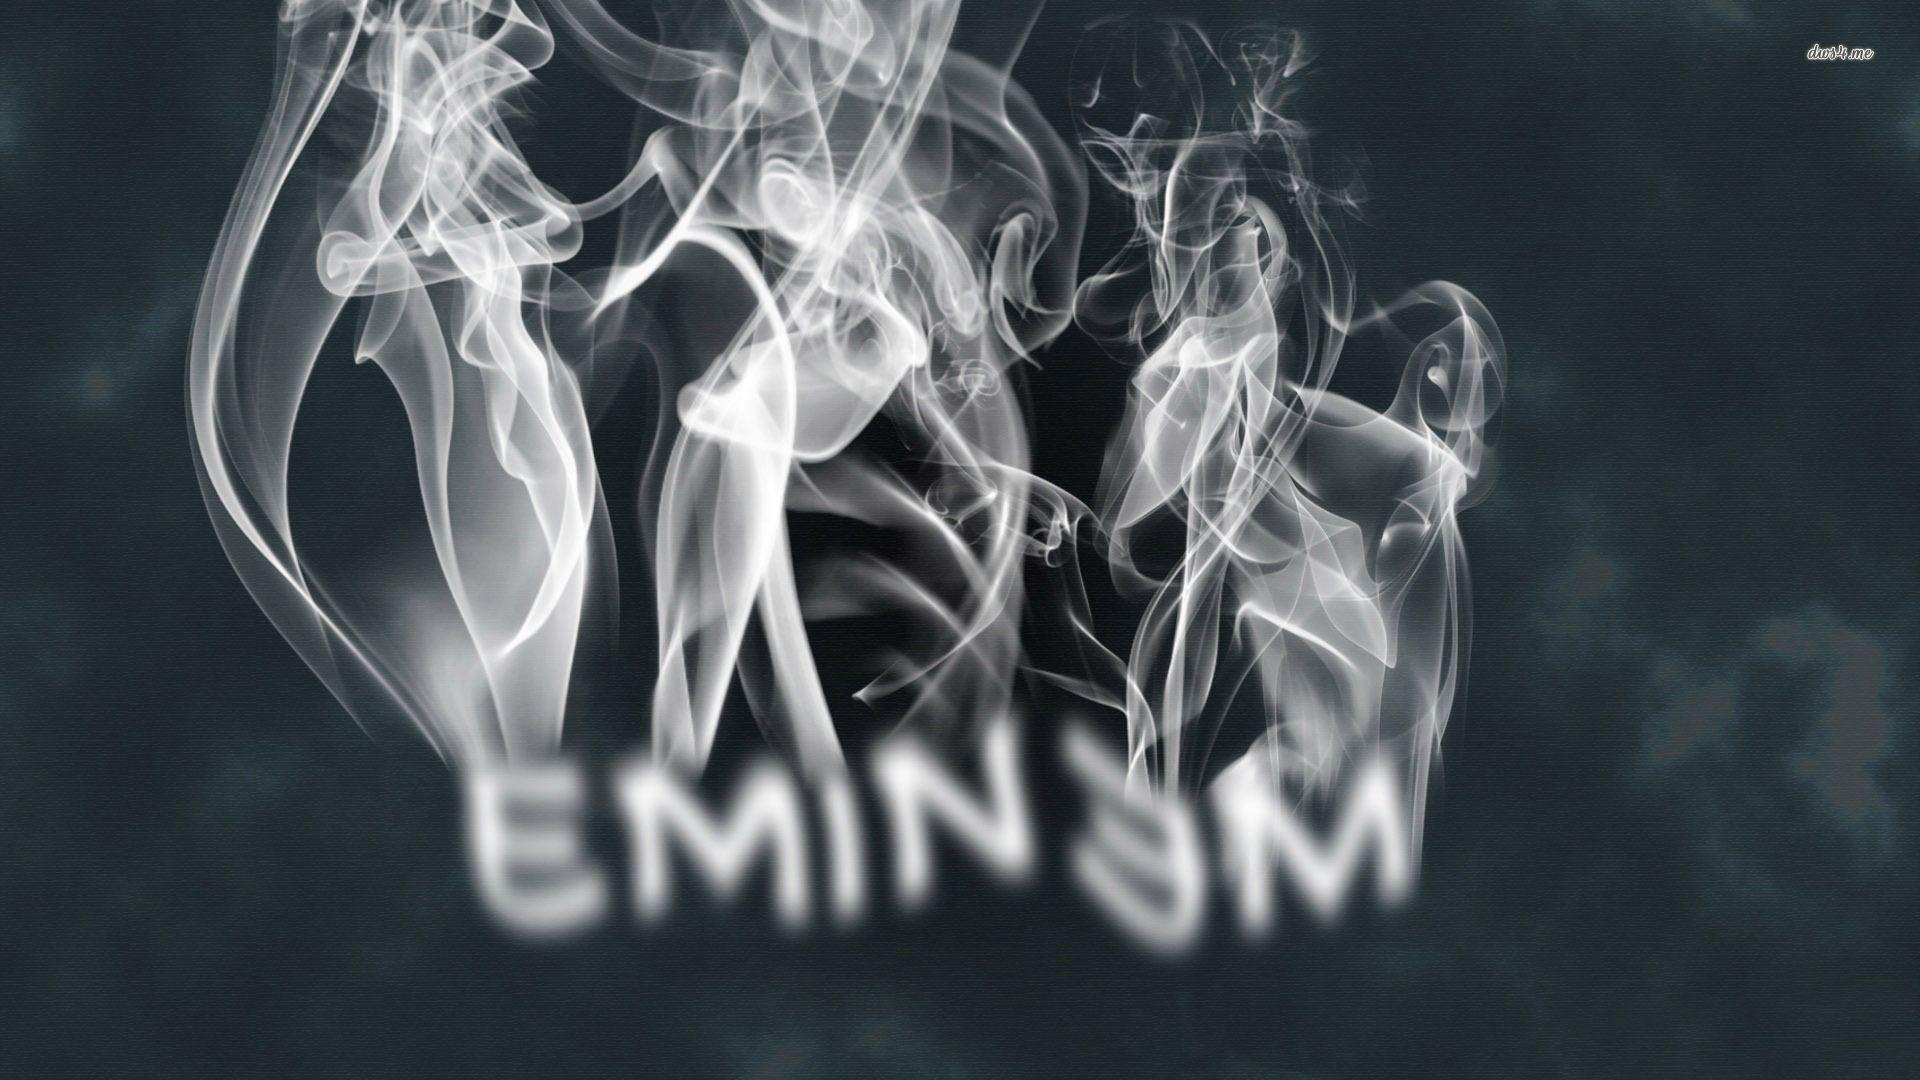 Eminem 2015 Wallpapers Recovery Wallpaper Cave